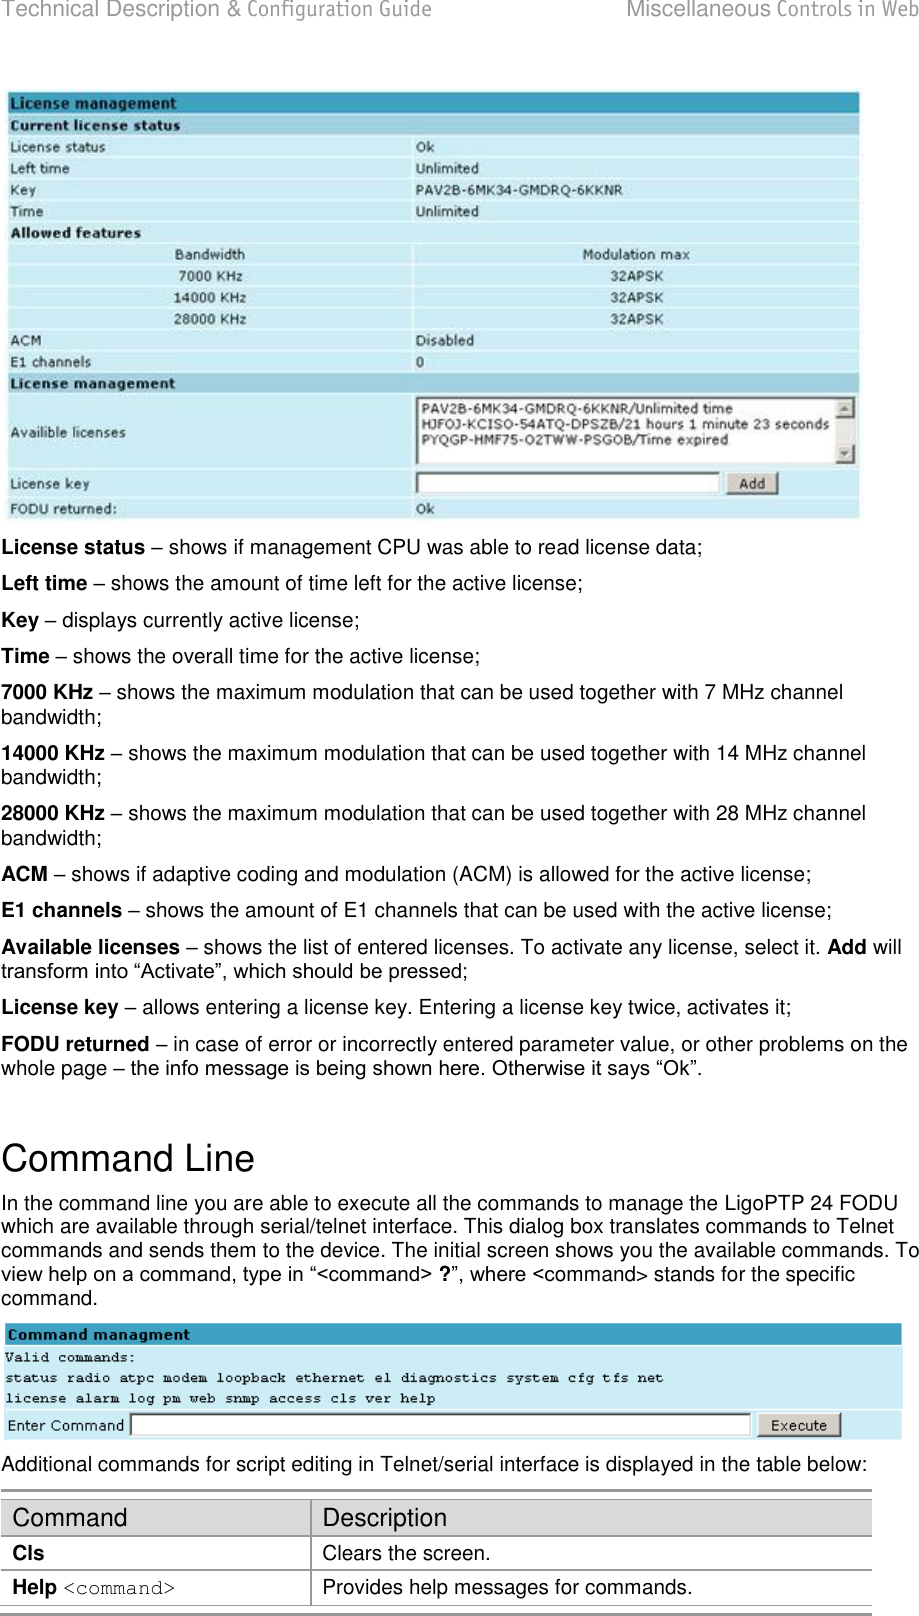 Technical Description &amp; Configuration Guide  Miscellaneous Controls in Web  LigoWave  Page 77  License status – shows if management CPU was able to read license data; Left time – shows the amount of time left for the active license; Key – displays currently active license; Time  shows the overall time for the active license; 7000 KHz  shows the maximum modulation that can be used together with 7 MHz channel bandwidth; 14000 KHz – shows the maximum modulation that can be used together with 14 MHz channel bandwidth; 28000 KHz  shows the maximum modulation that can be used together with 28 MHz channel bandwidth; ACM – shows if adaptive coding and modulation (ACM) is allowed for the active license; E1 channels – shows the amount of E1 channels that can be used with the active license; Available licenses – shows the list of entered licenses. To activate any license, select it. Add will  License key – allows entering a license key. Entering a license key twice, activates it; FODU returned – in case of error or incorrectly entered parameter value, or other problems on the whole page    Command Line In the command line you are able to execute all the commands to manage the LigoPTP 24 FODU which are available through serial/telnet interface. This dialog box translates commands to Telnet commands and sends them to the device. The initial screen shows you the available commands. To ?ommand&gt; stands for the specific command.  Additional commands for script editing in Telnet/serial interface is displayed in the table below: Command Description Cls Clears the screen. Help &lt;command&gt; Provides help messages for commands. 